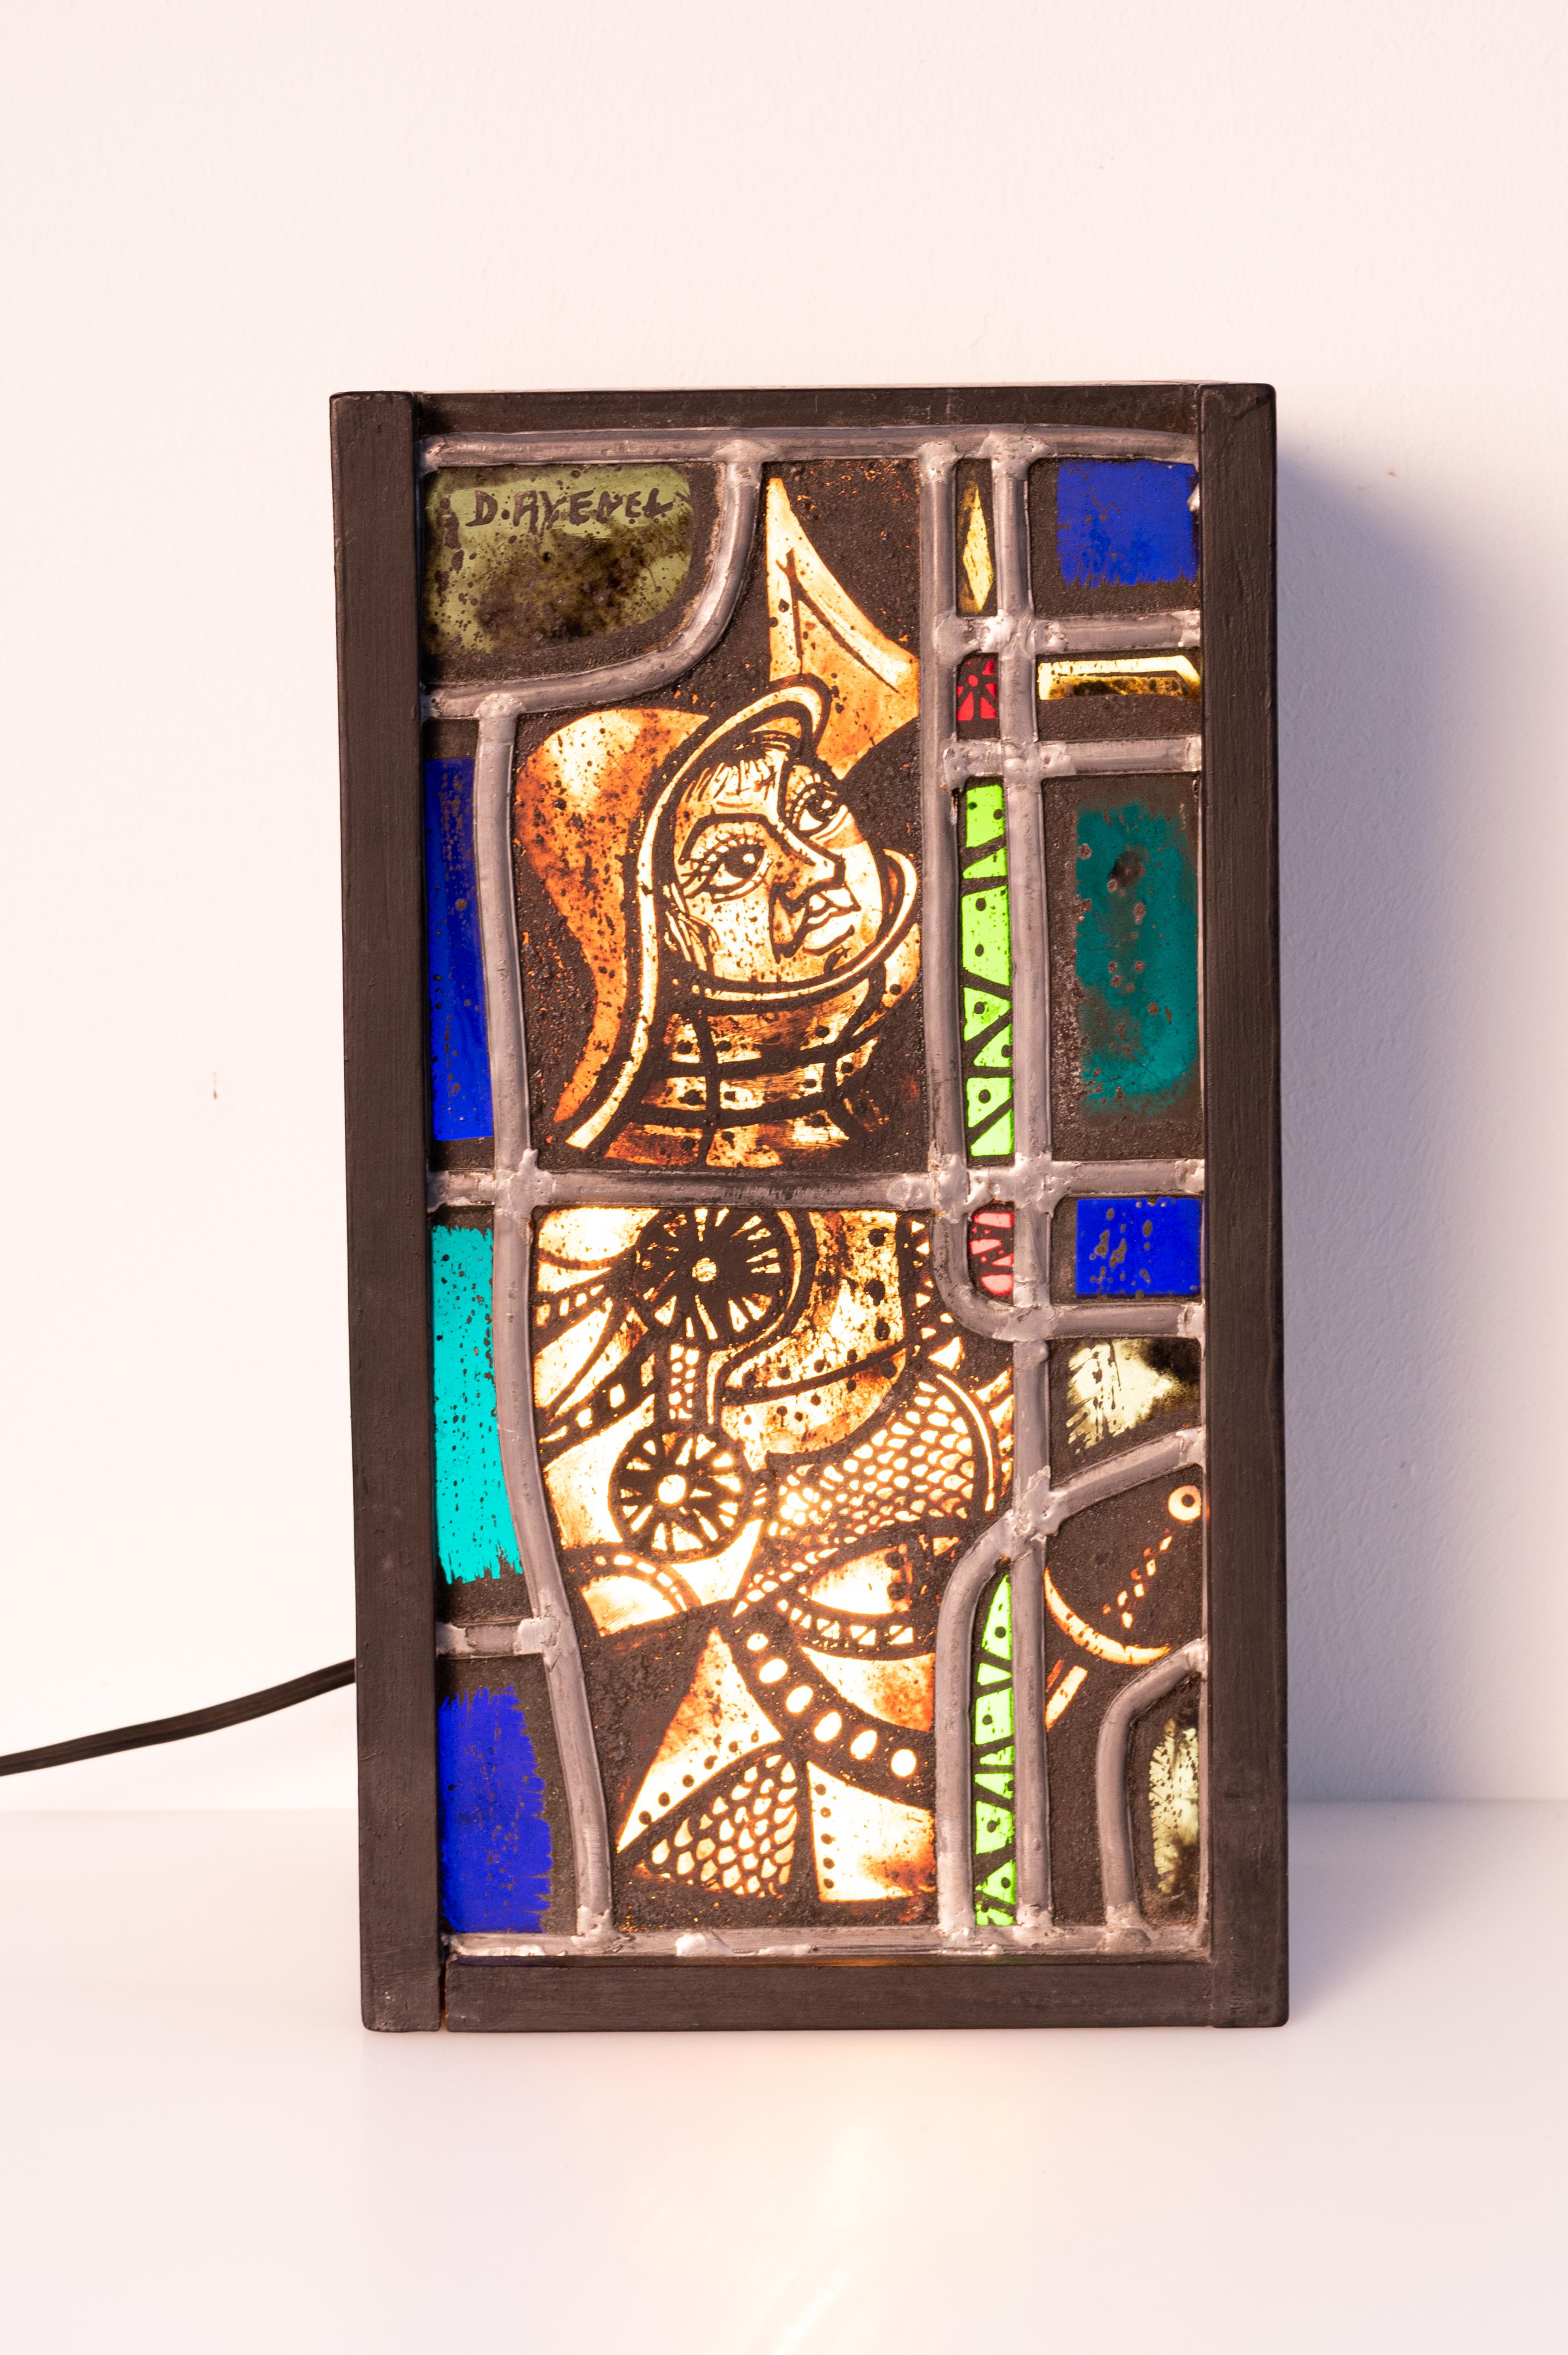 Stained glass display light box, which can easily be plugged in (220-240 V)

The artist depicted a knight in armour. Signed d’Avenel.